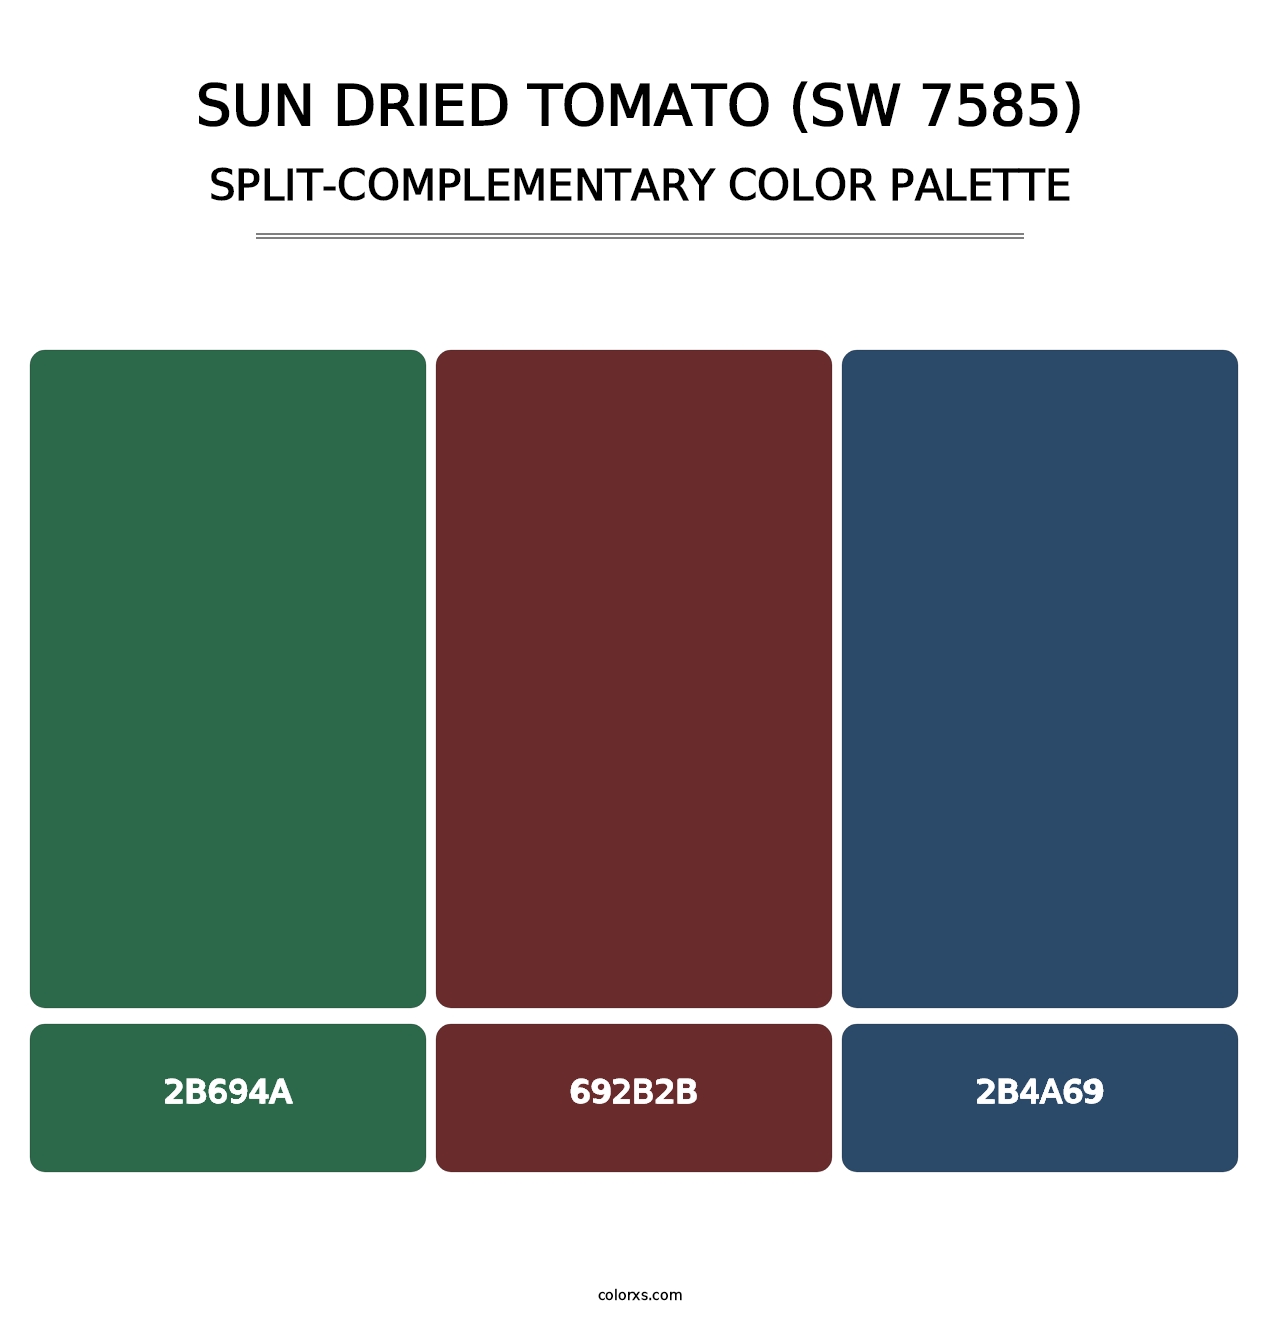 Sun Dried Tomato (SW 7585) - Split-Complementary Color Palette